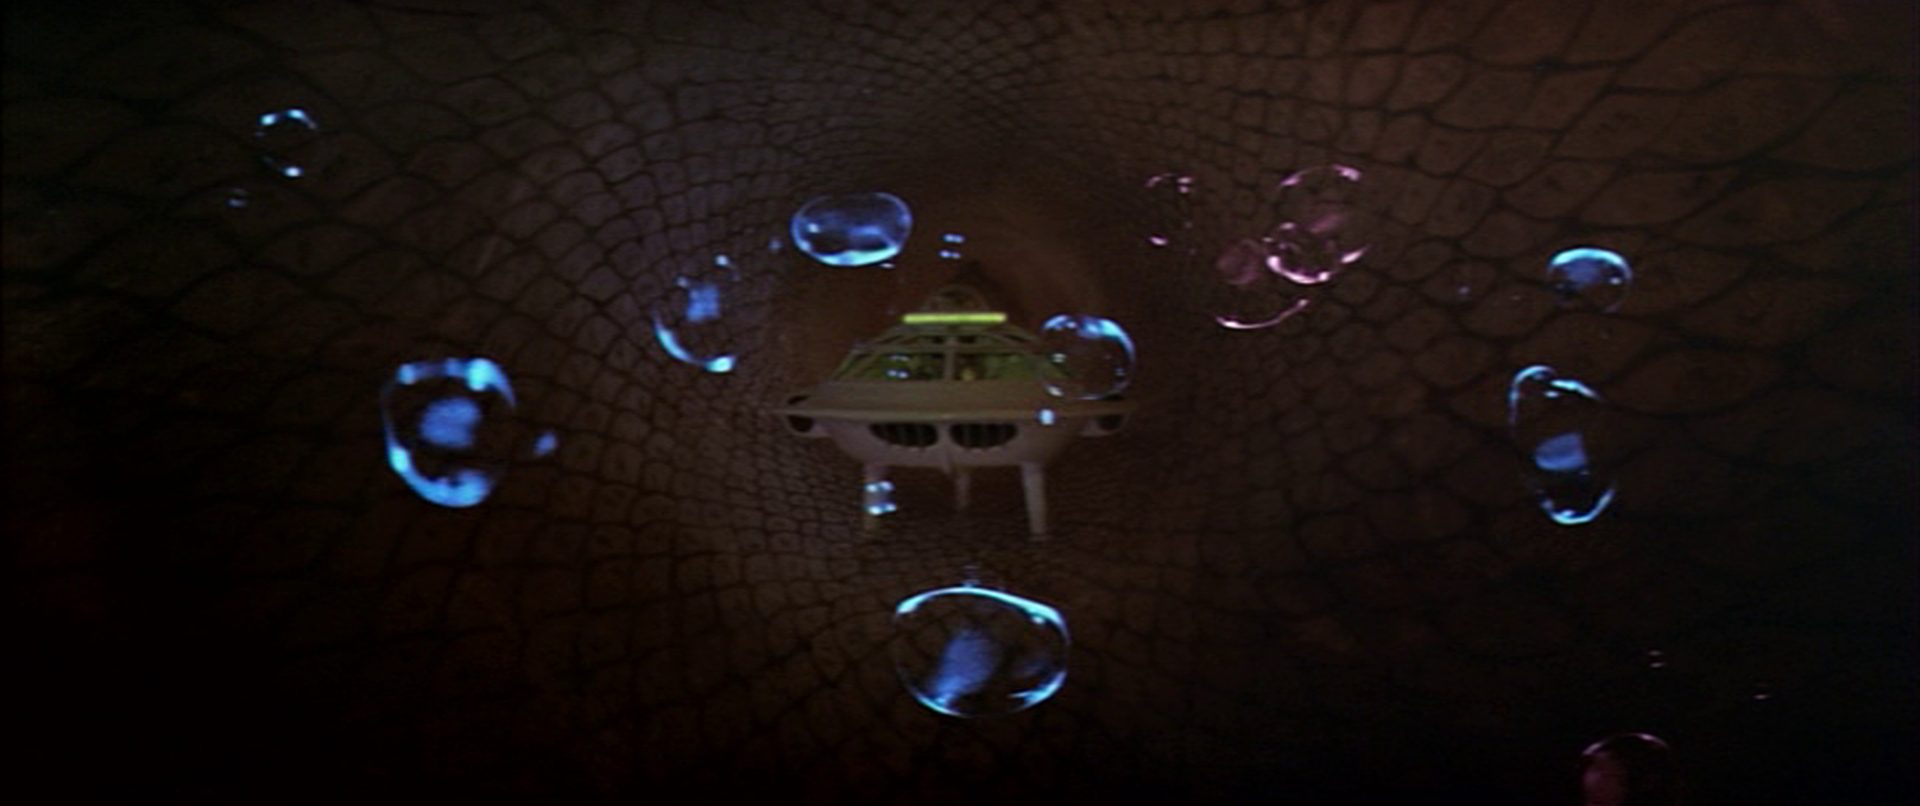 Frontal shot of the futuristic submarine in the human body, surrounded by transparent bubbles.